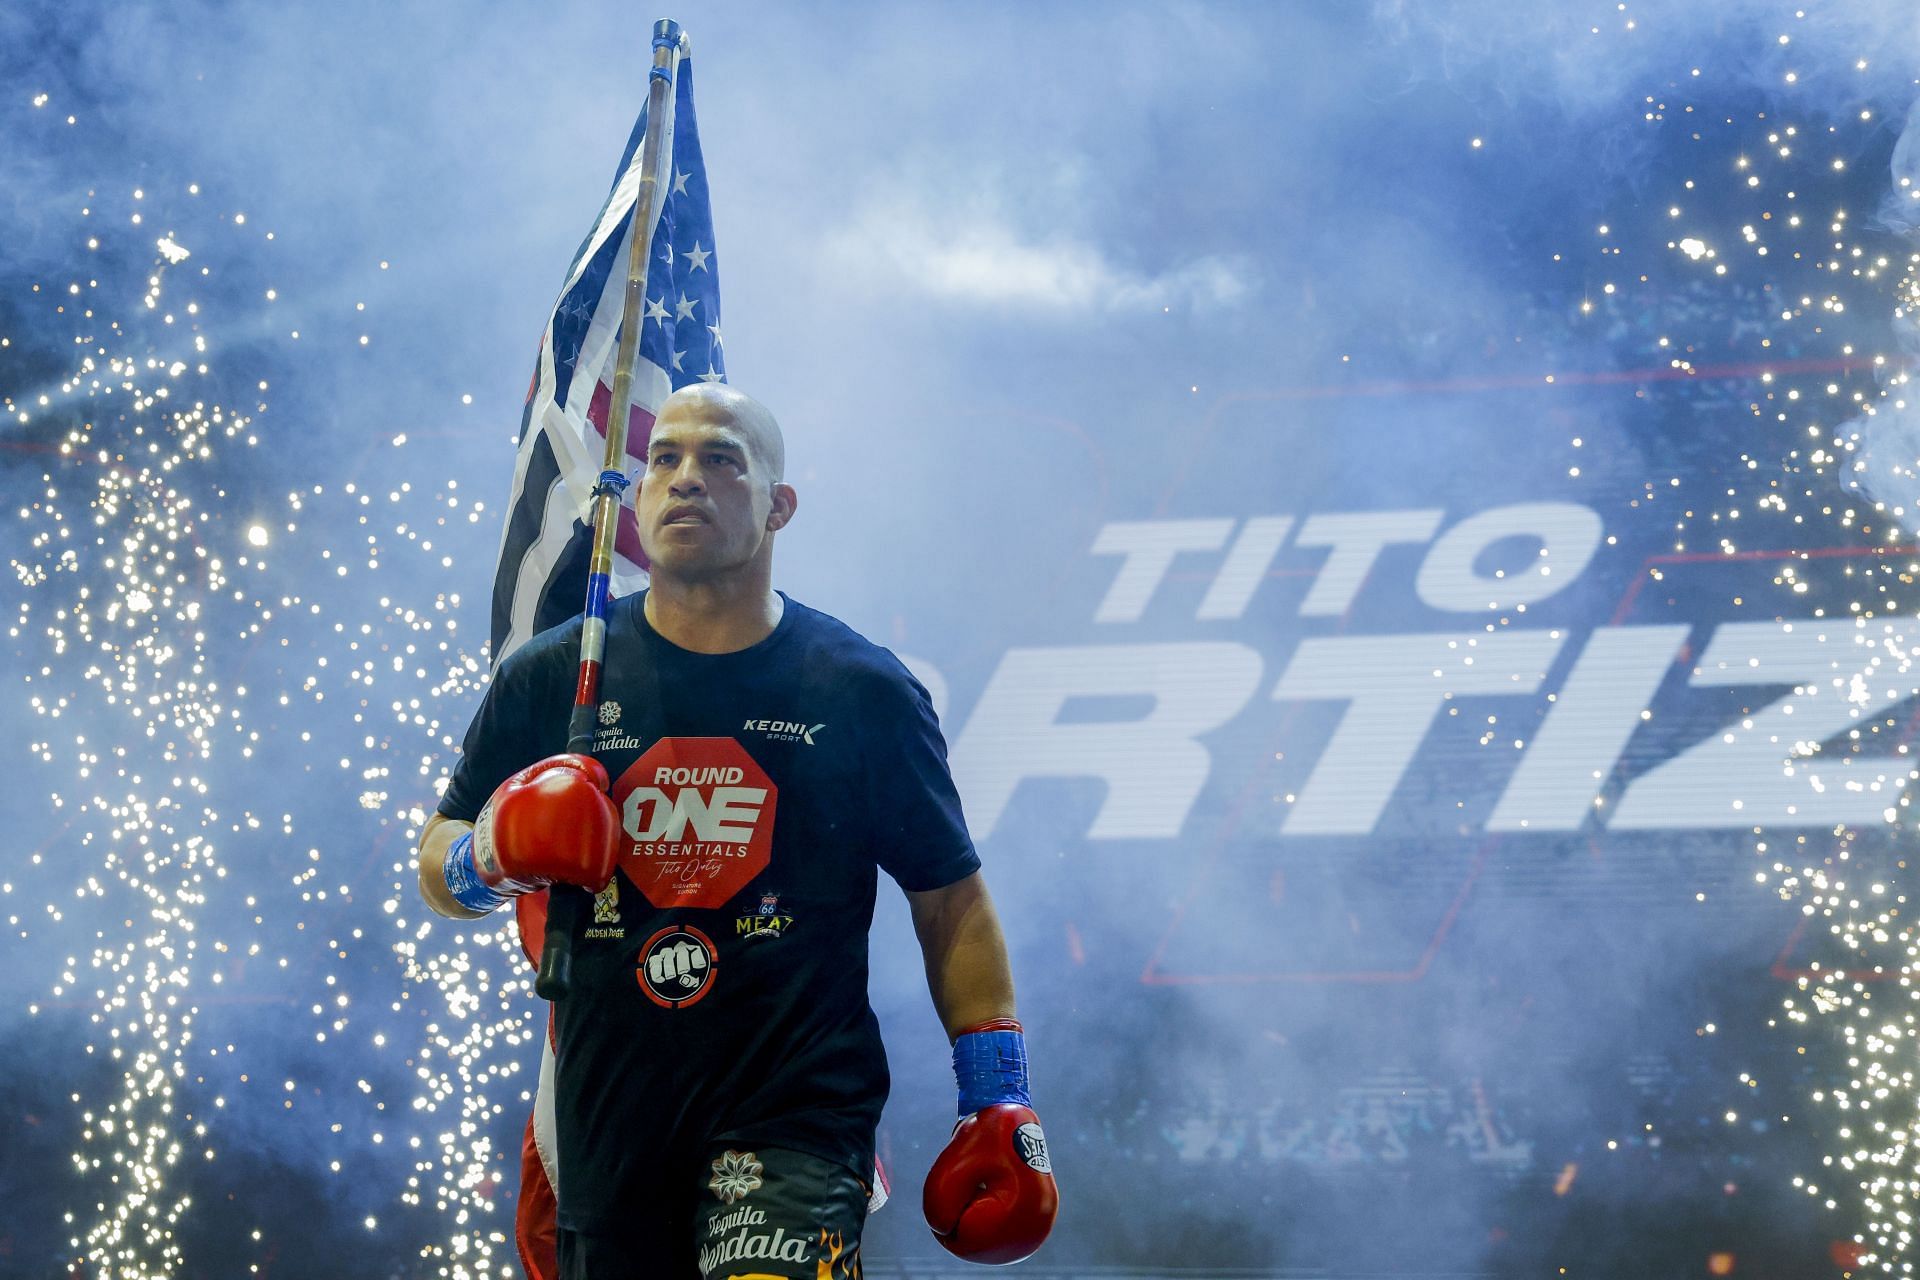 Tito Ortiz walking out to fight Anderson Silva in a boxing match [Image via Getty]